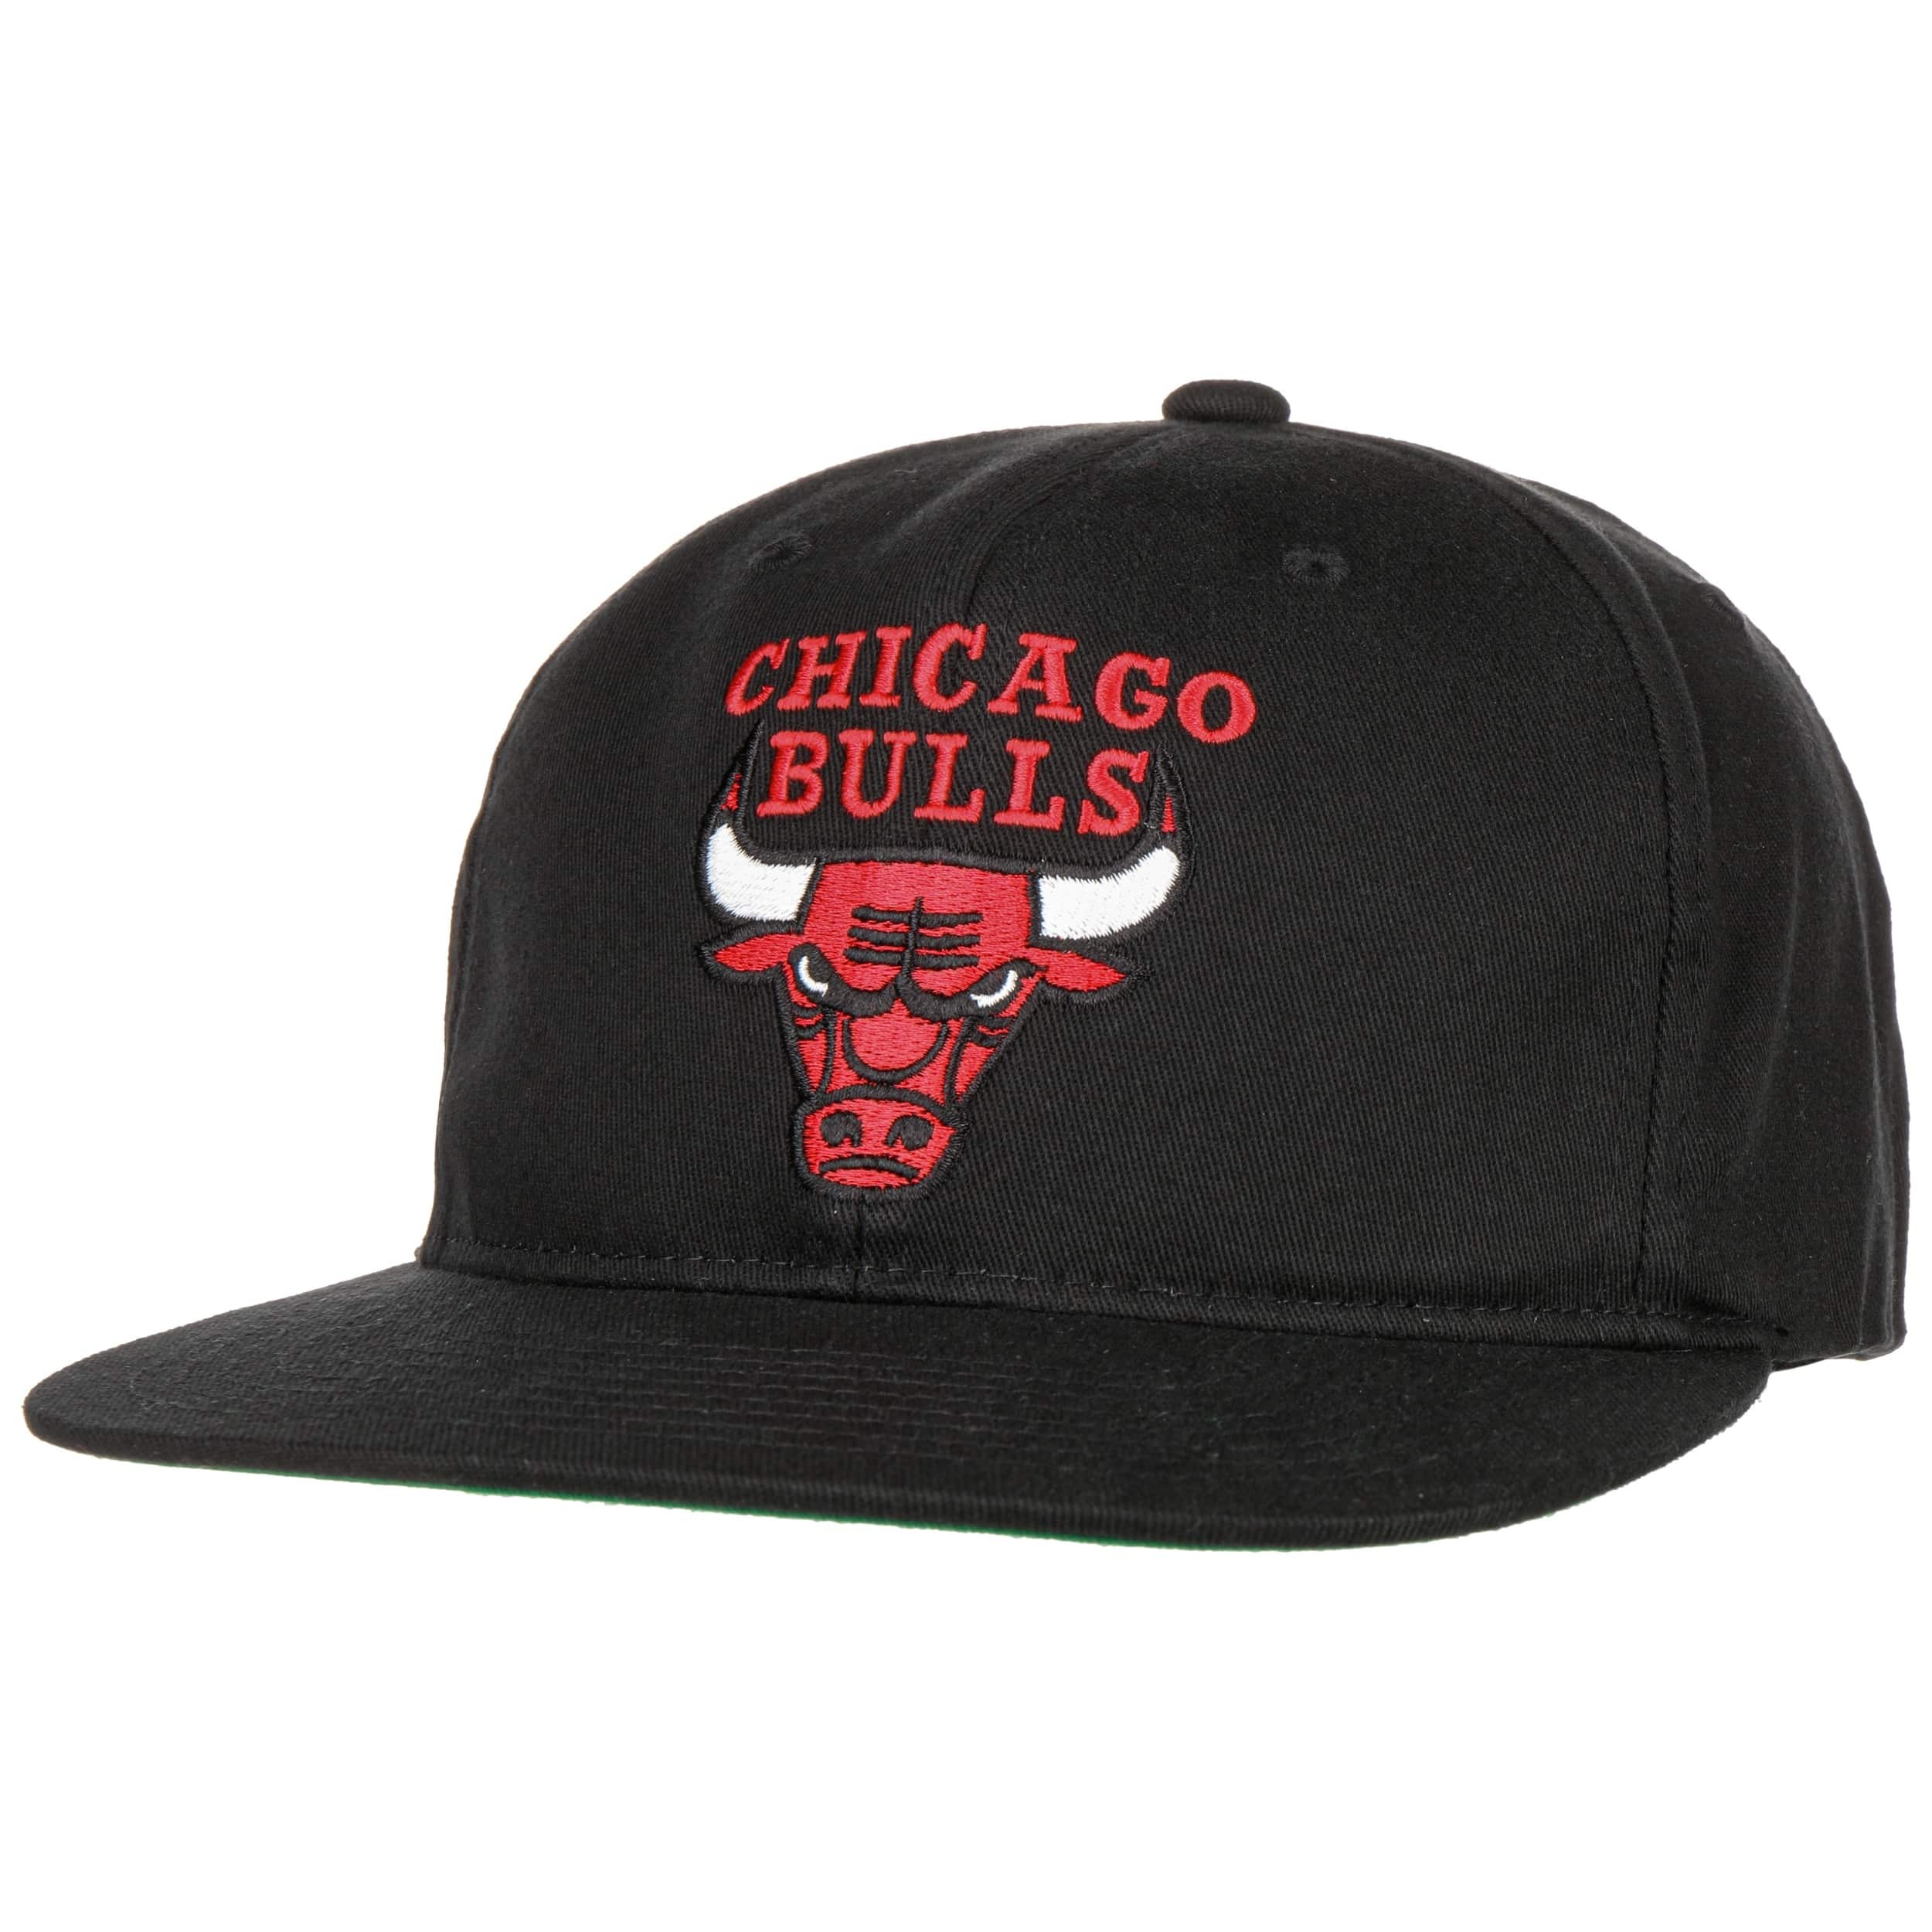 Deadstock Bulls Cap by Mitchell & Ness - 37,95